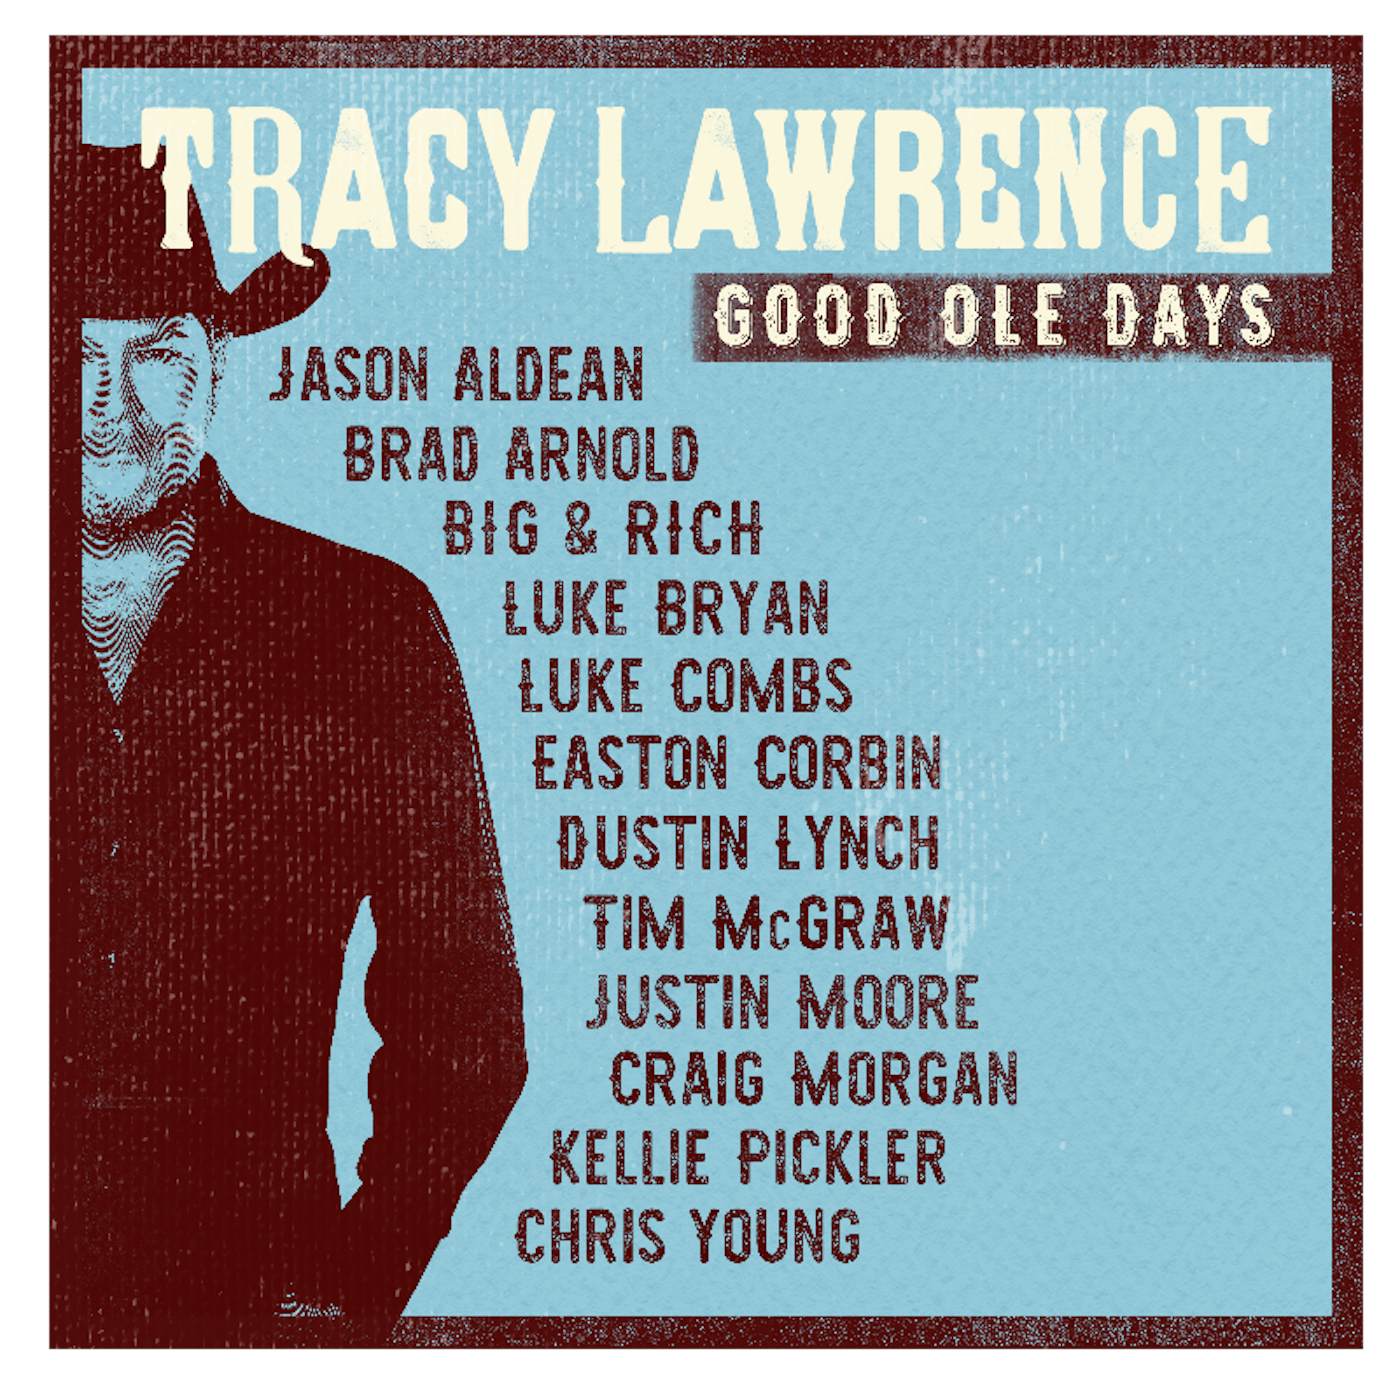 Tracy Lawrence Good Ole Days CD